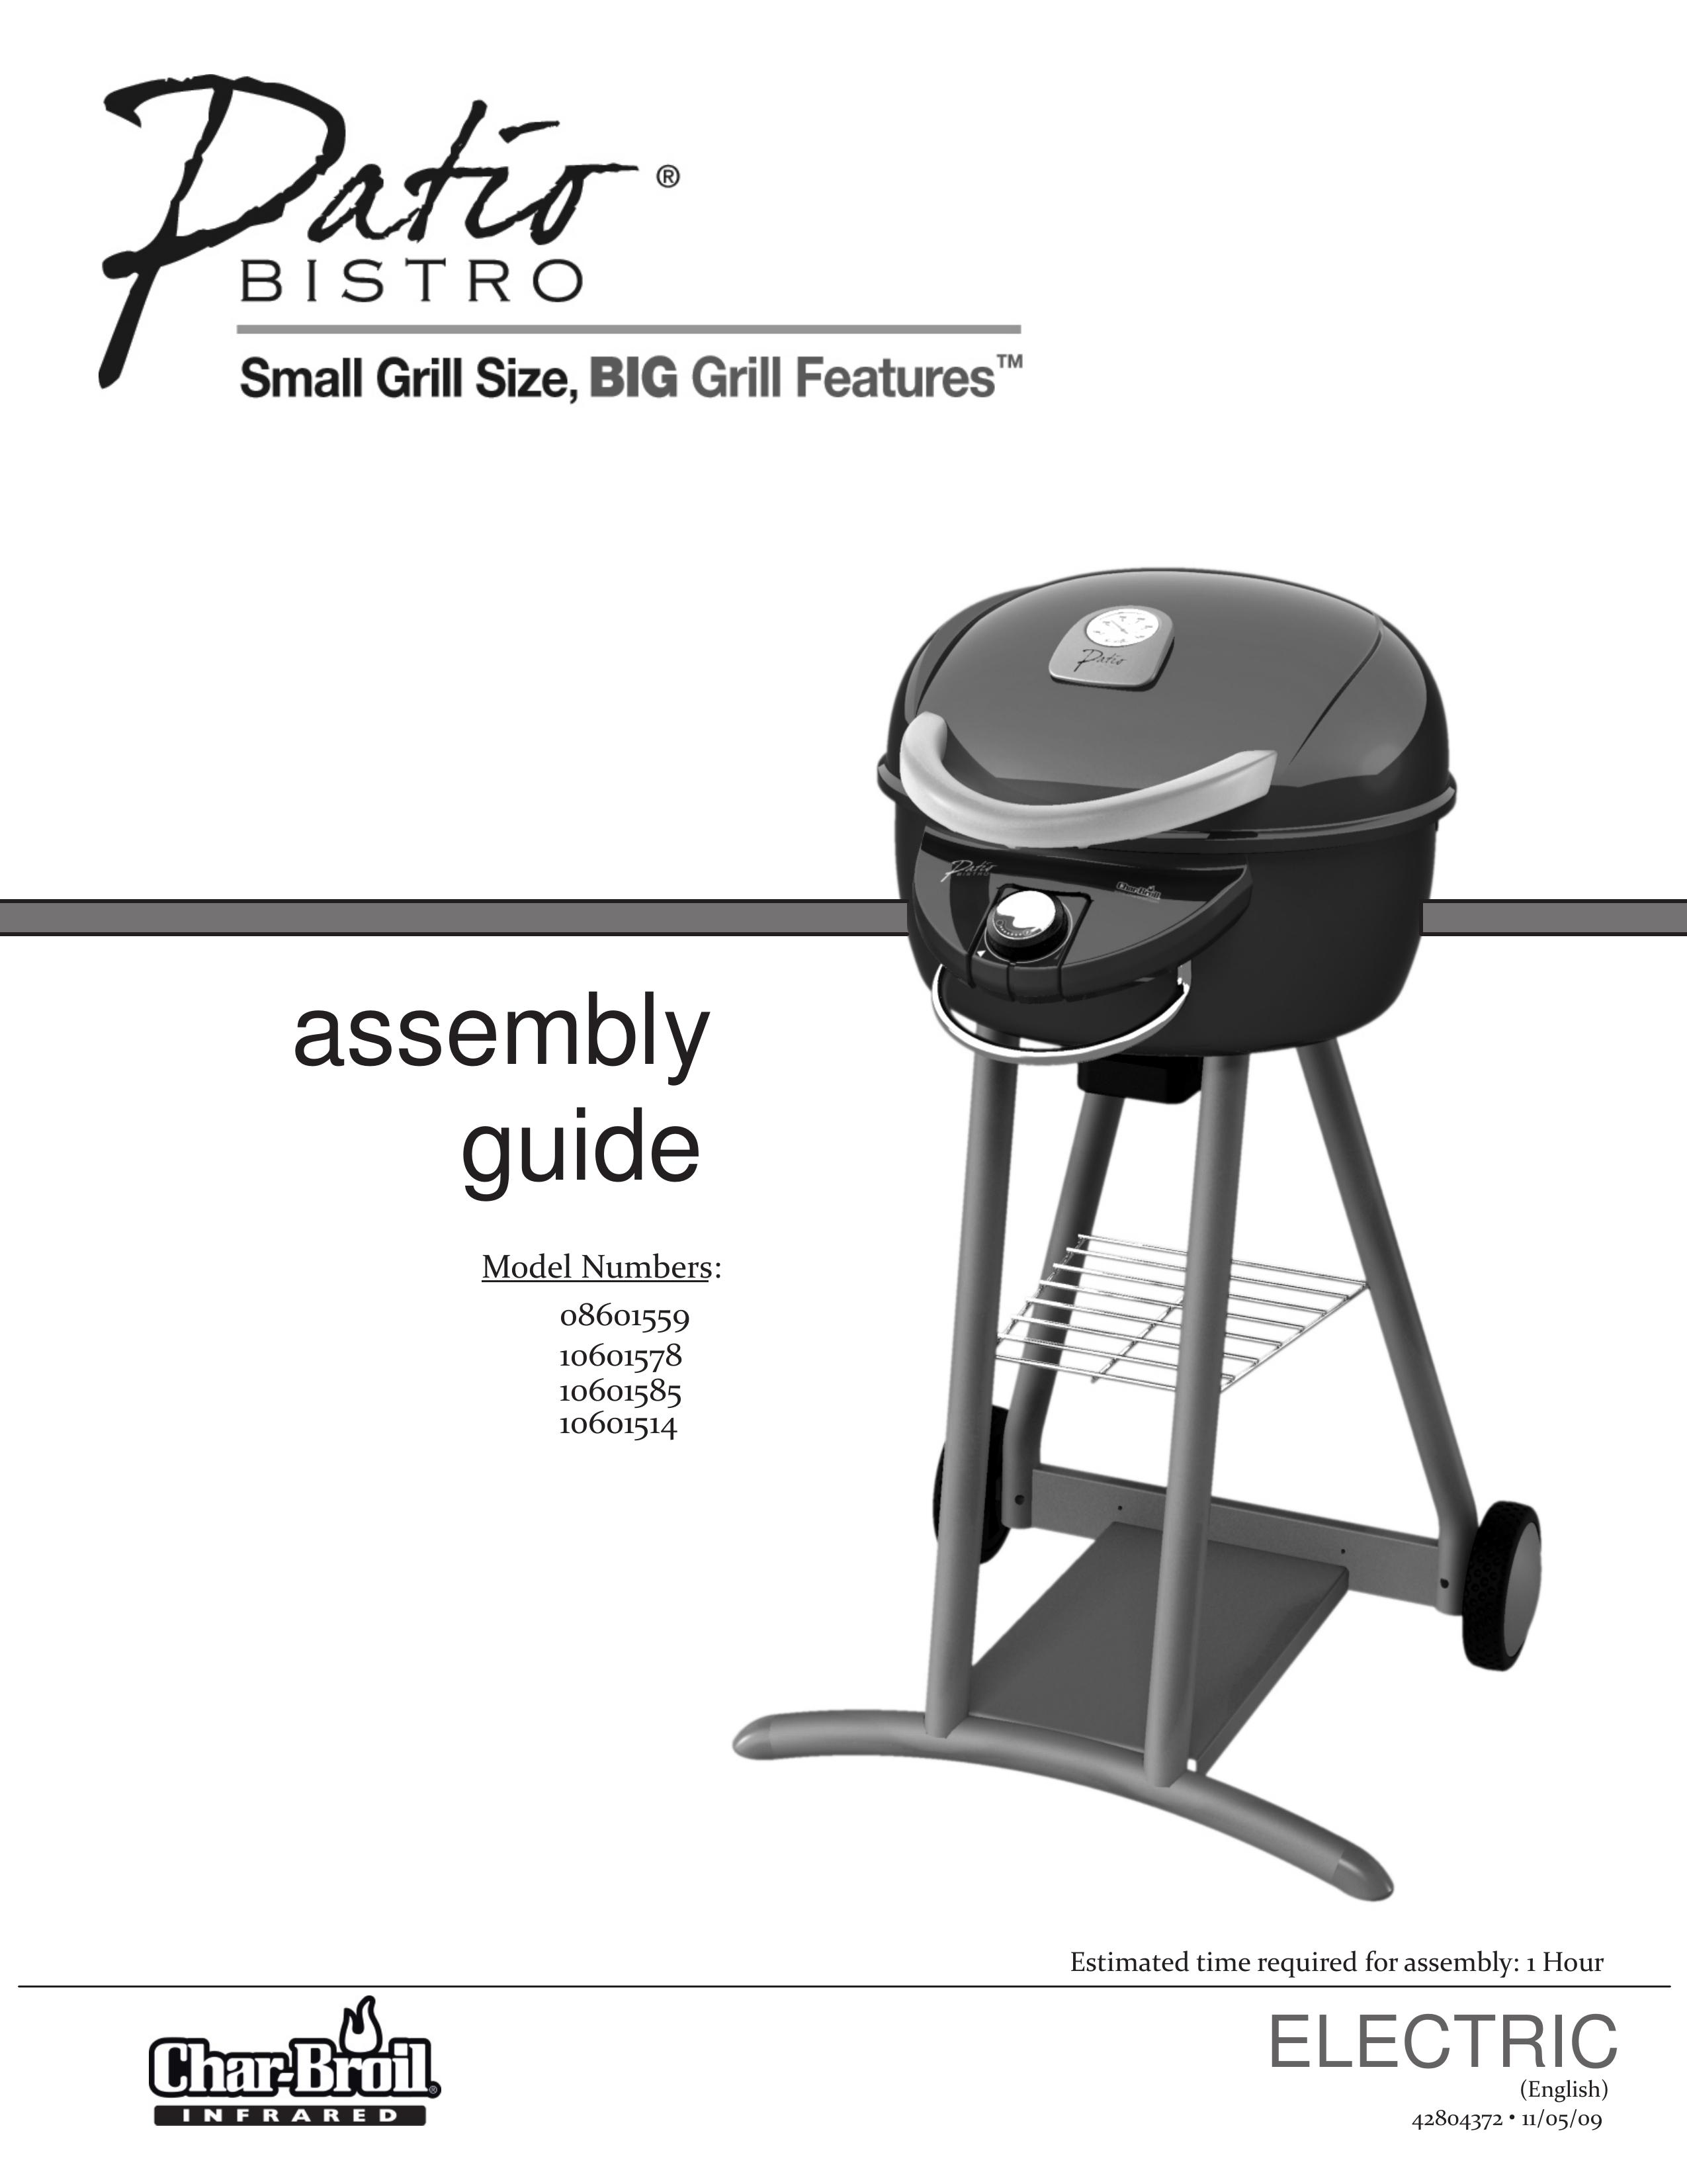 Char-Broil 10601514 Electric Grill User Manual